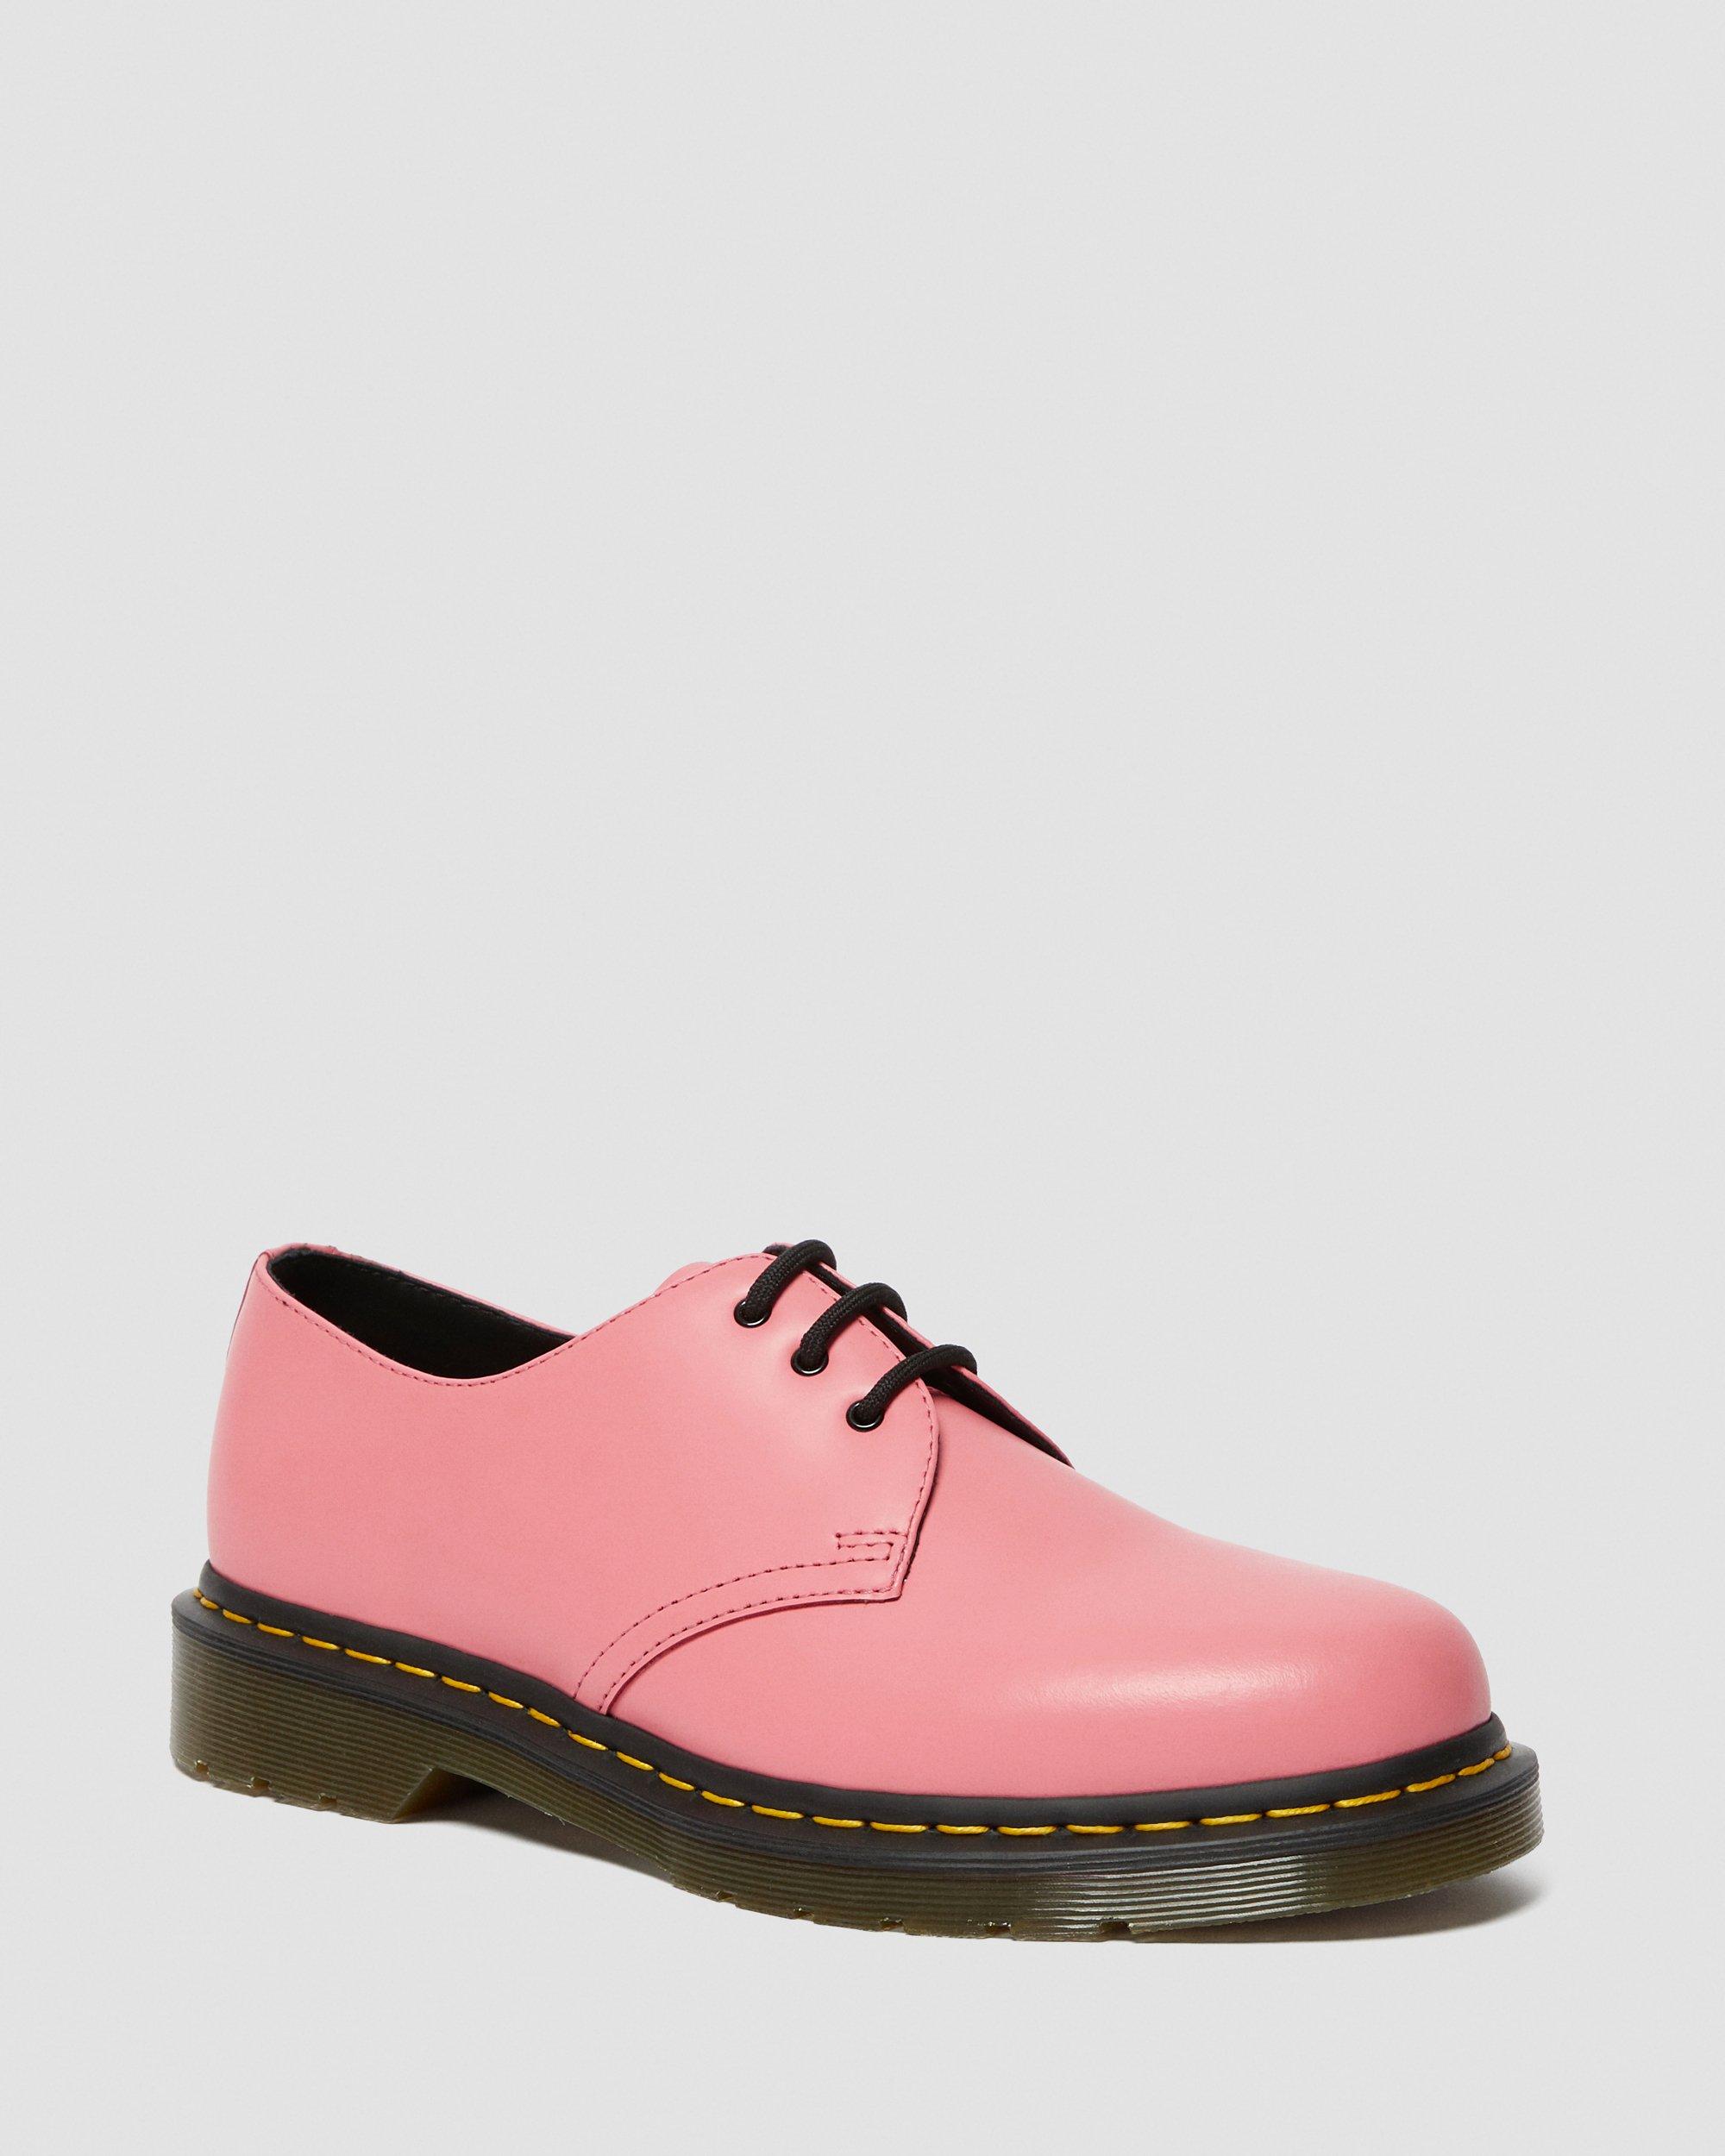 1461 Smooth Leather Oxford Shoes, Acid Pink | Dr. Martens